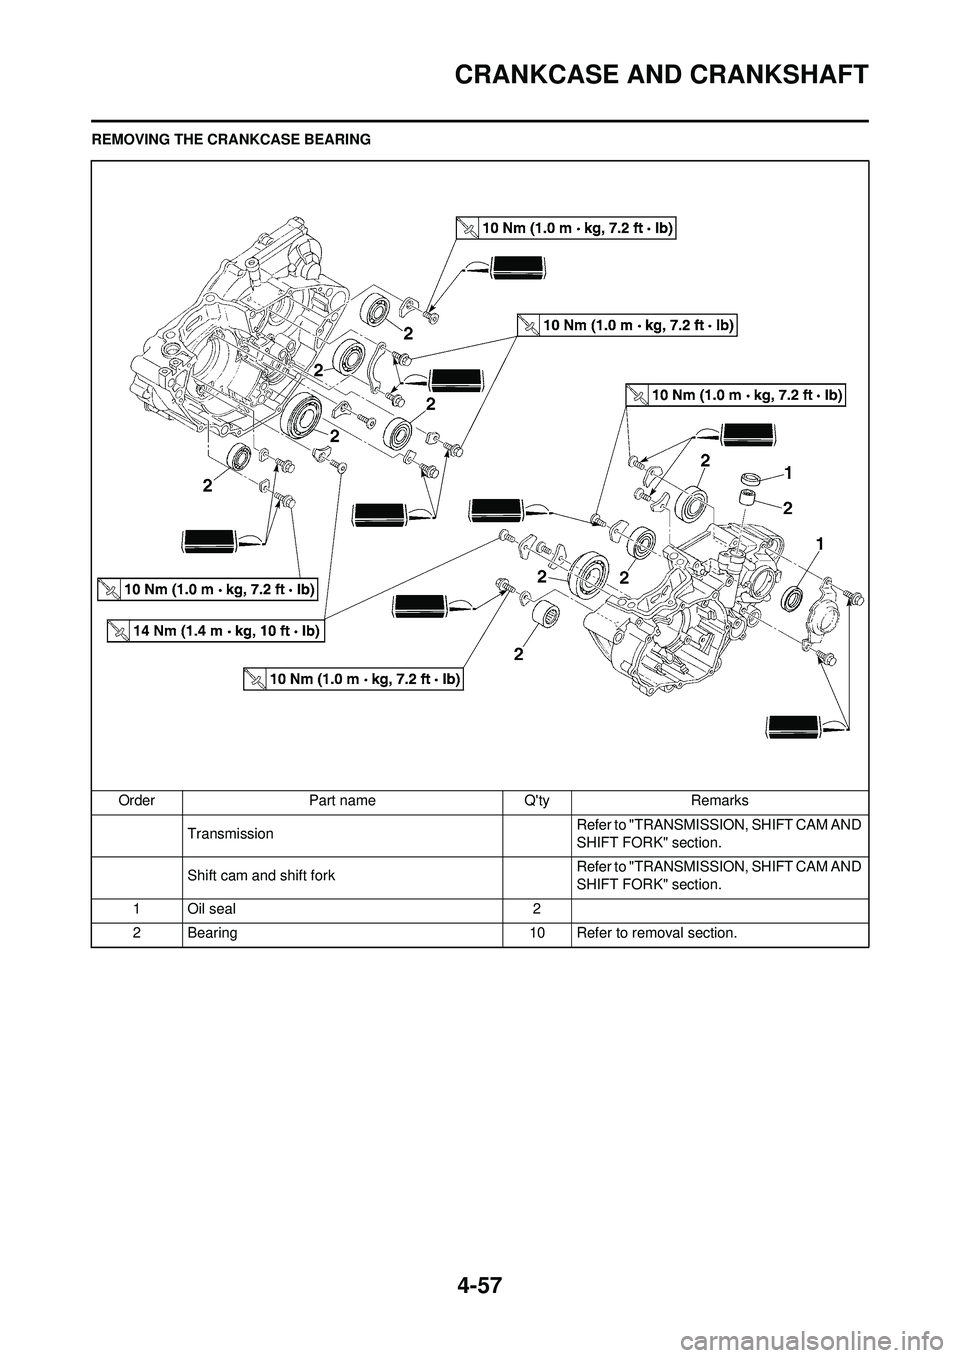 YAMAHA YZ250F 2008  Betriebsanleitungen (in German) 4-57
CRANKCASE AND CRANKSHAFT
REMOVING THE CRANKCASE BEARINGOrder Part name Qty Remarks Transmission Refer to "TRANSMISSION, SHIFT CAM AND 
SHIFT FORK" section.
Shift cam and shift fork  Refer to "TR